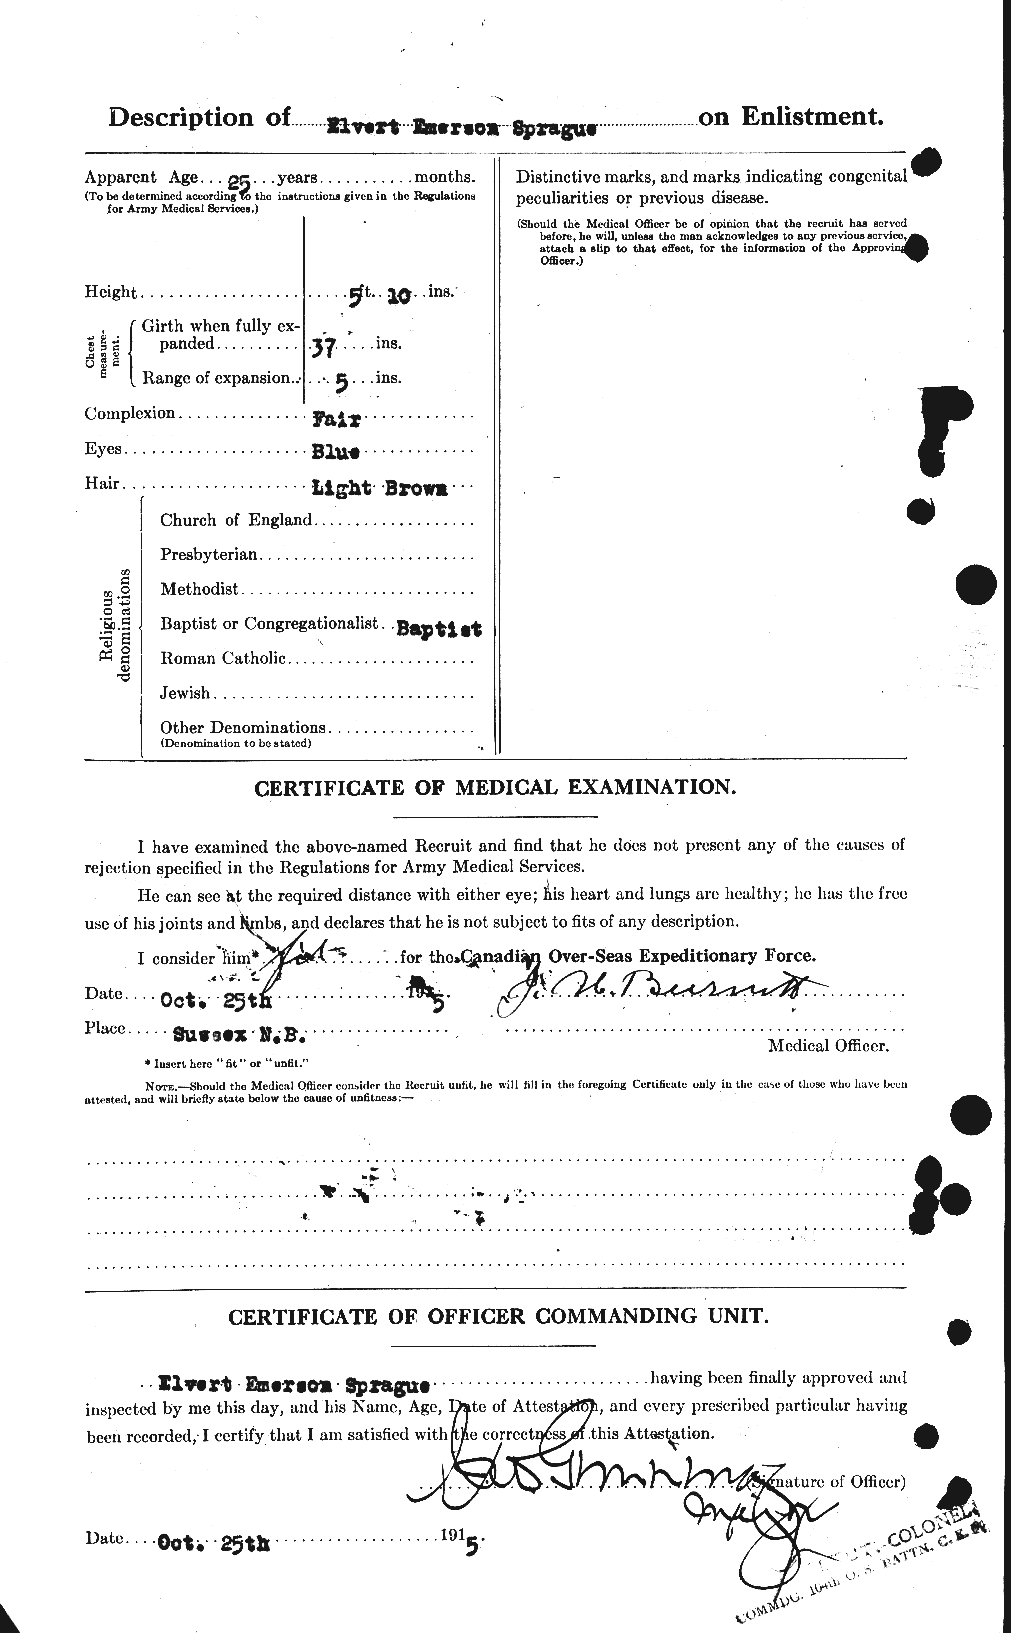 Personnel Records of the First World War - CEF 113140b